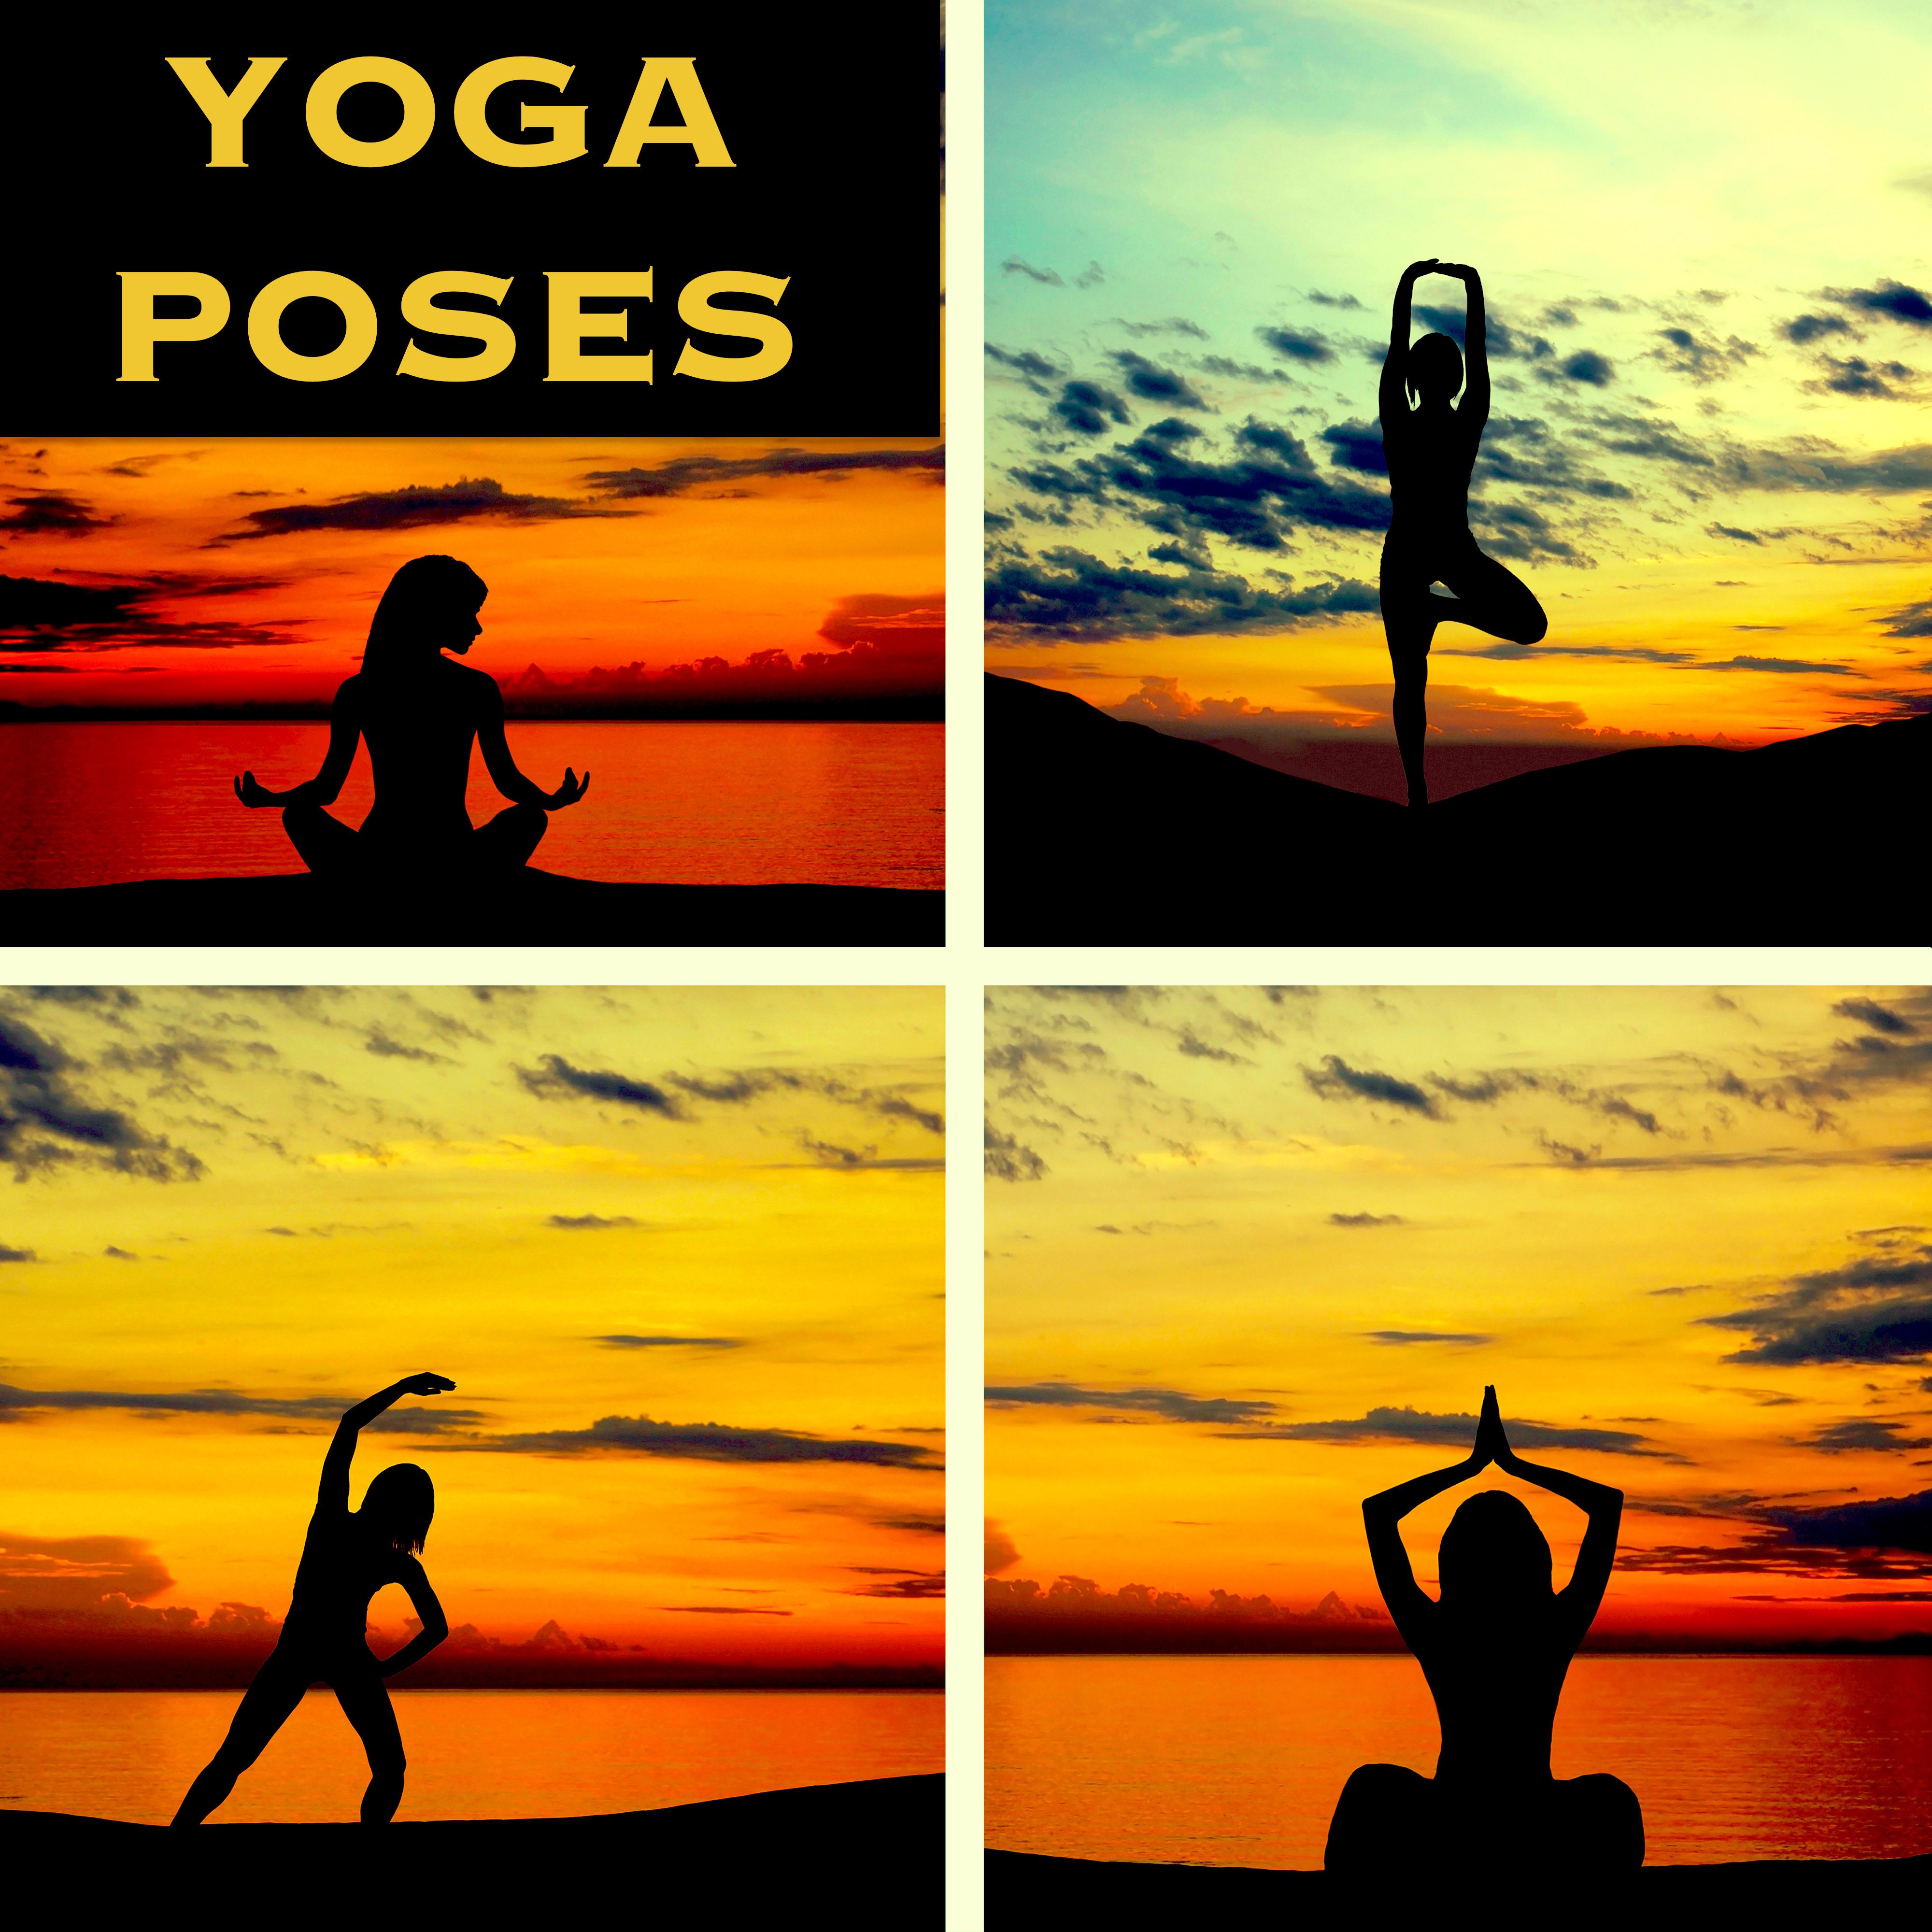 Yoga Poses – Songs for Yoga Class, Relaxation, Concentration & Mindfulness Meditation